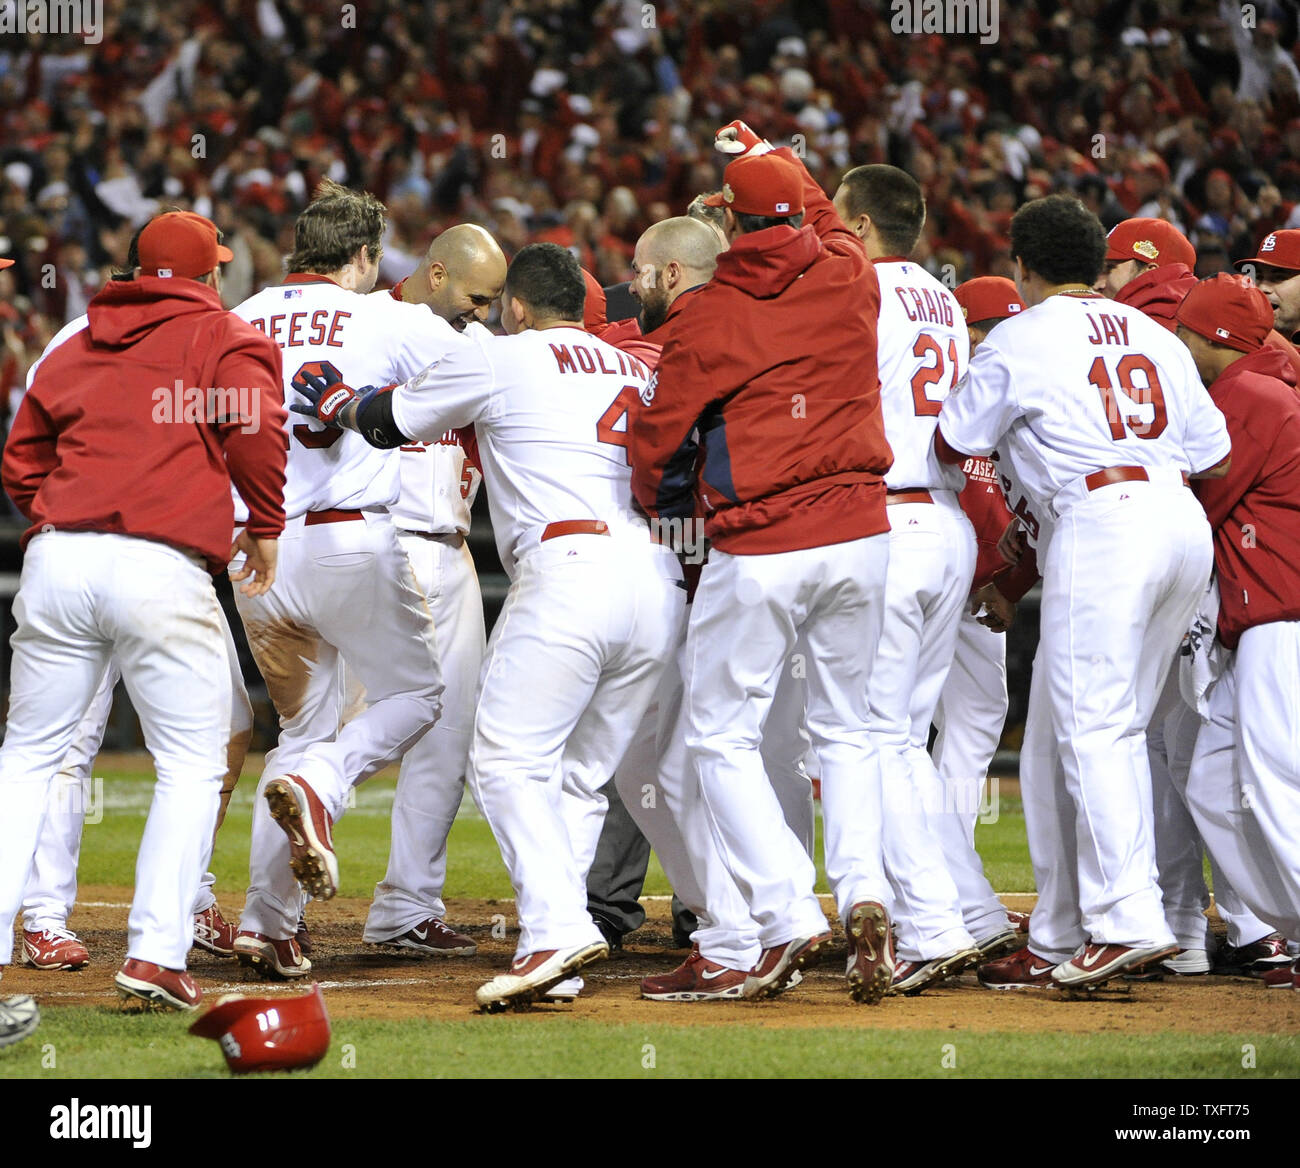 The St. Louis Cardinals mob teammate David Freese at home plate after he hit a game-winning solo home run during the 11th inning of game 6 of the World Series against the Texas Rangers at Busch Stadium on October 27, 2011 in St. Louis. The Cardinals won 10-9 in 11 innings tying the series 3-3.     UPI/Brian Kersey Stock Photo